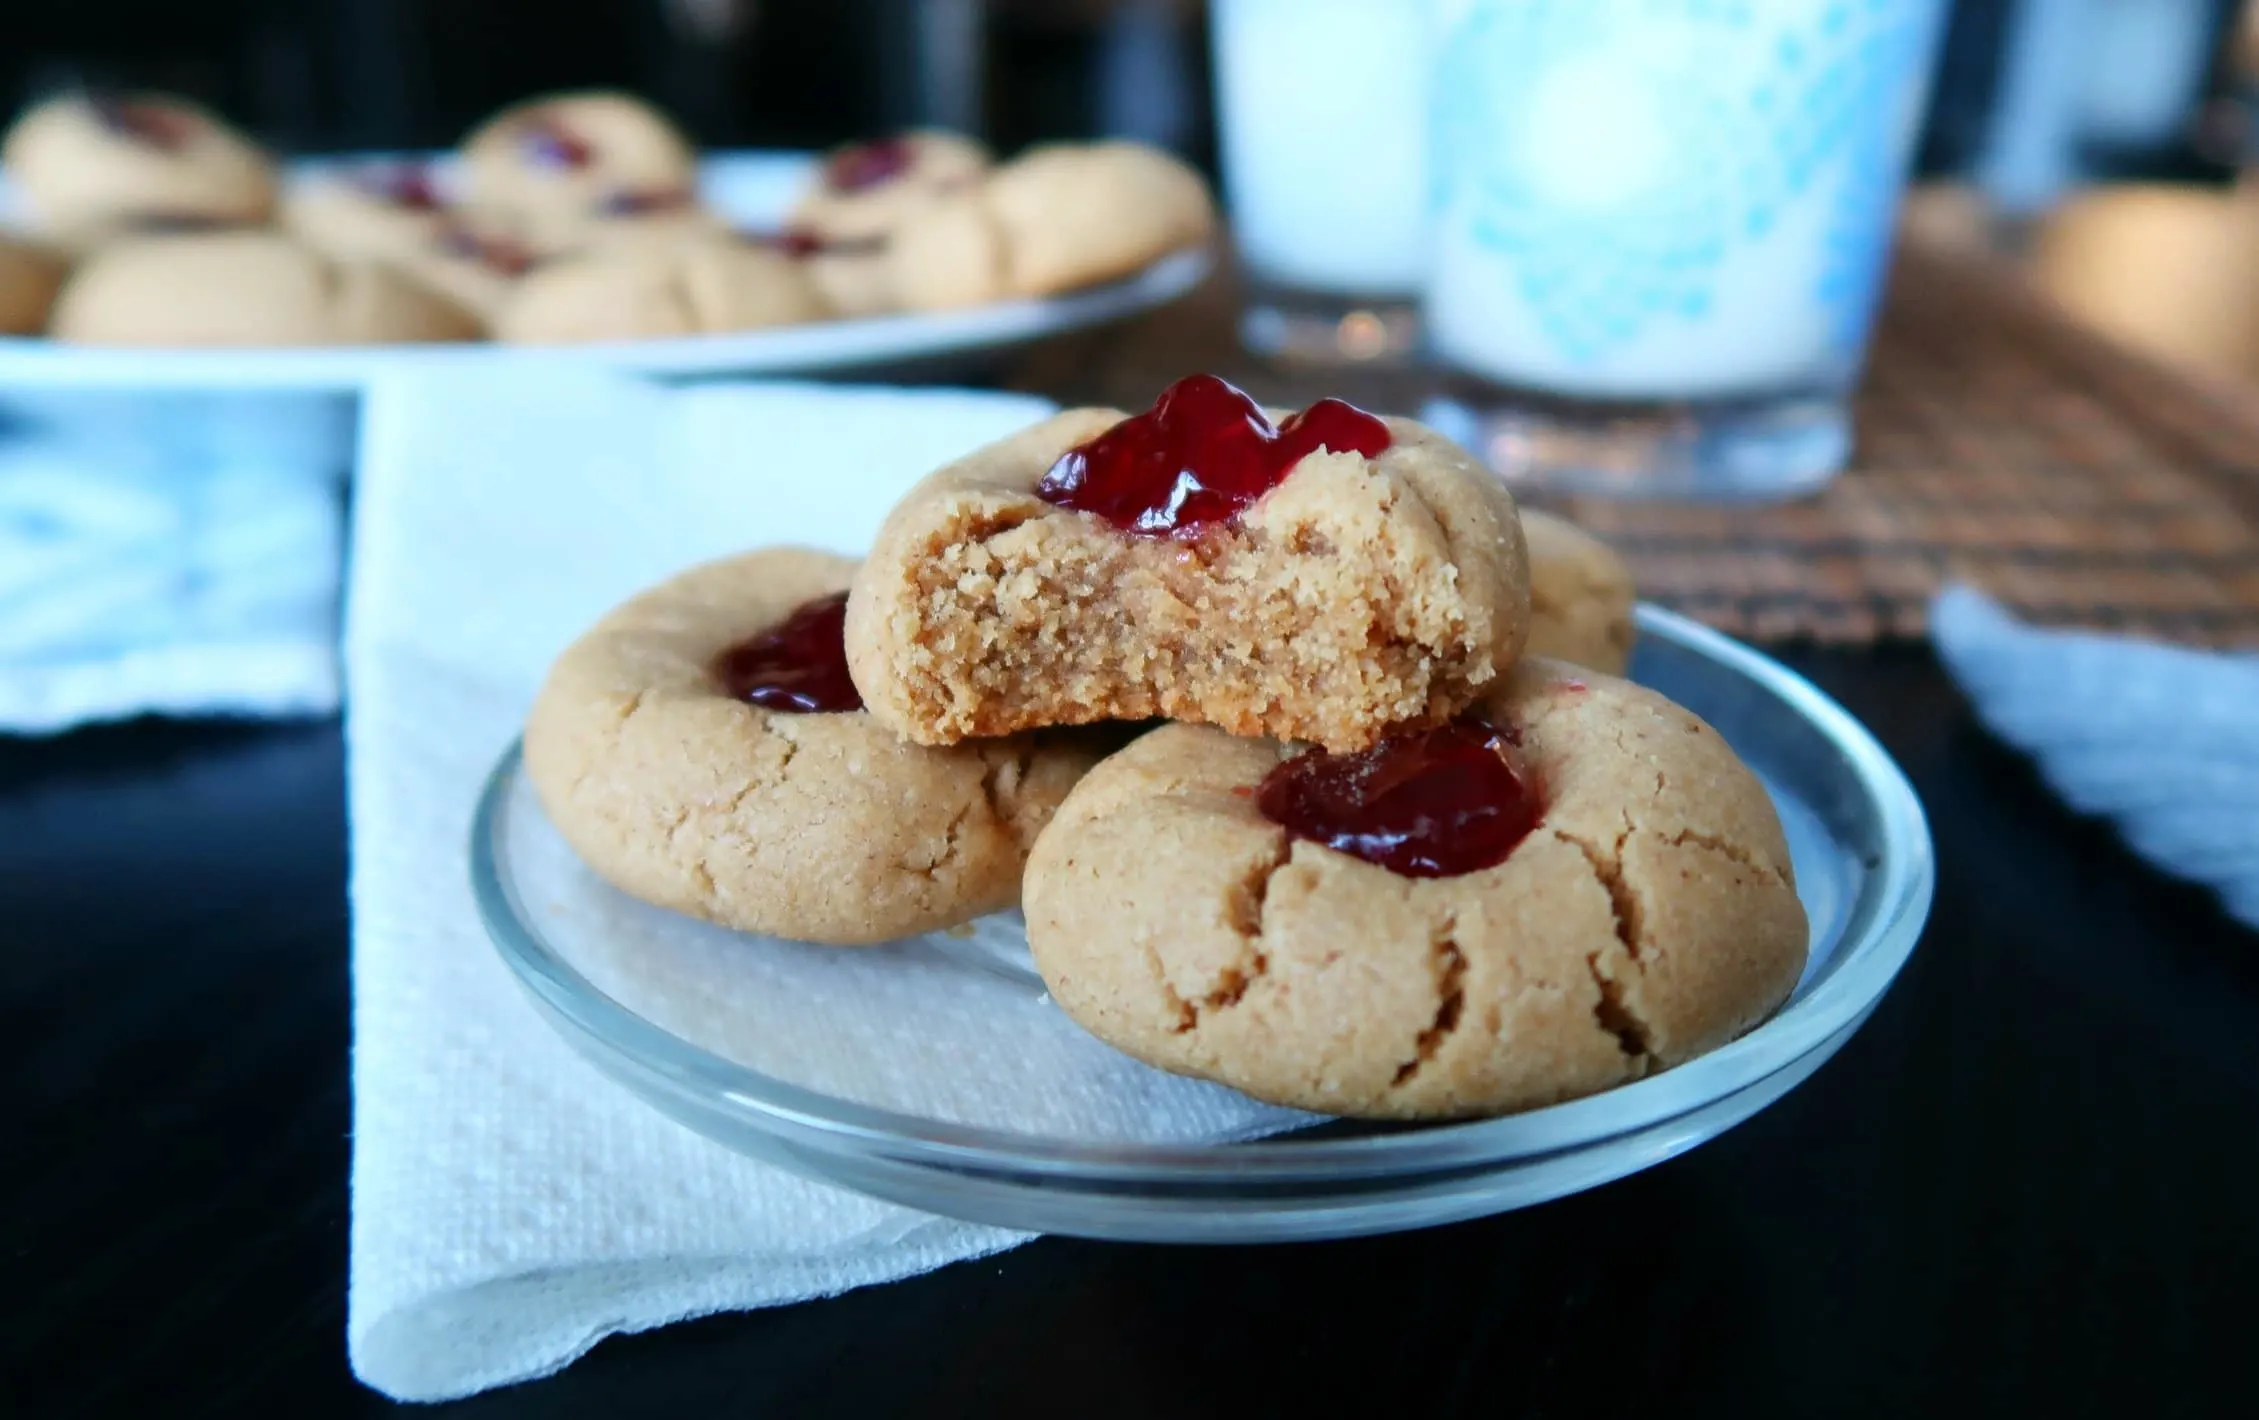 A Peanut Butter and Jelly Thumbprint Cookie with a bite missing.